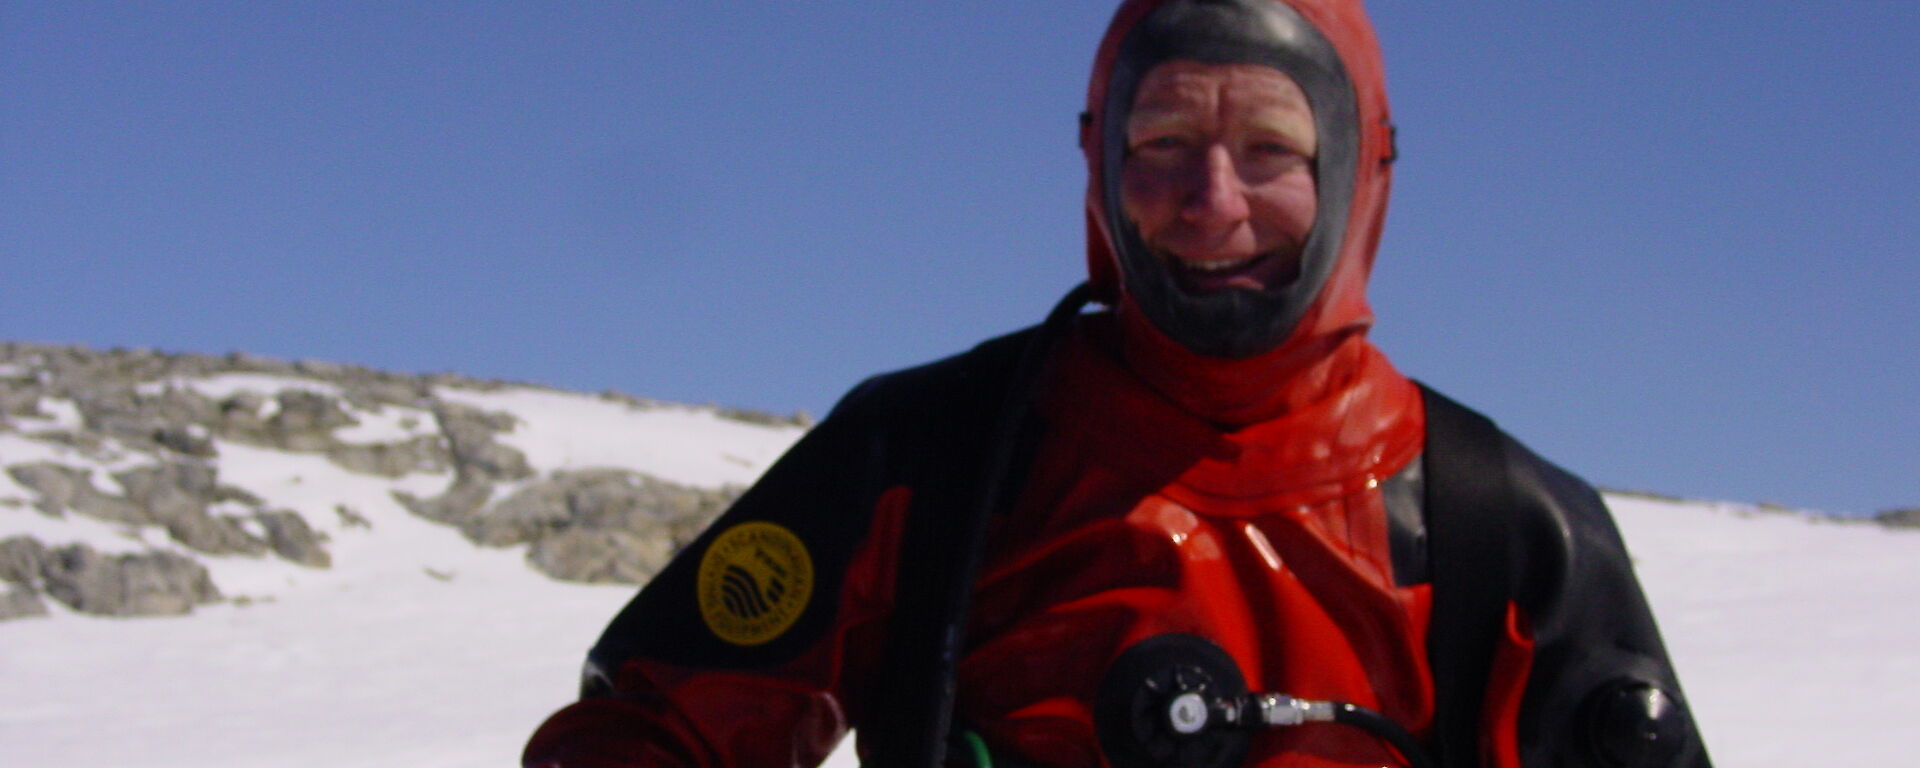 Dr Riddle in a drysuit preparing to dive as part of research into human impacts in Antarctica